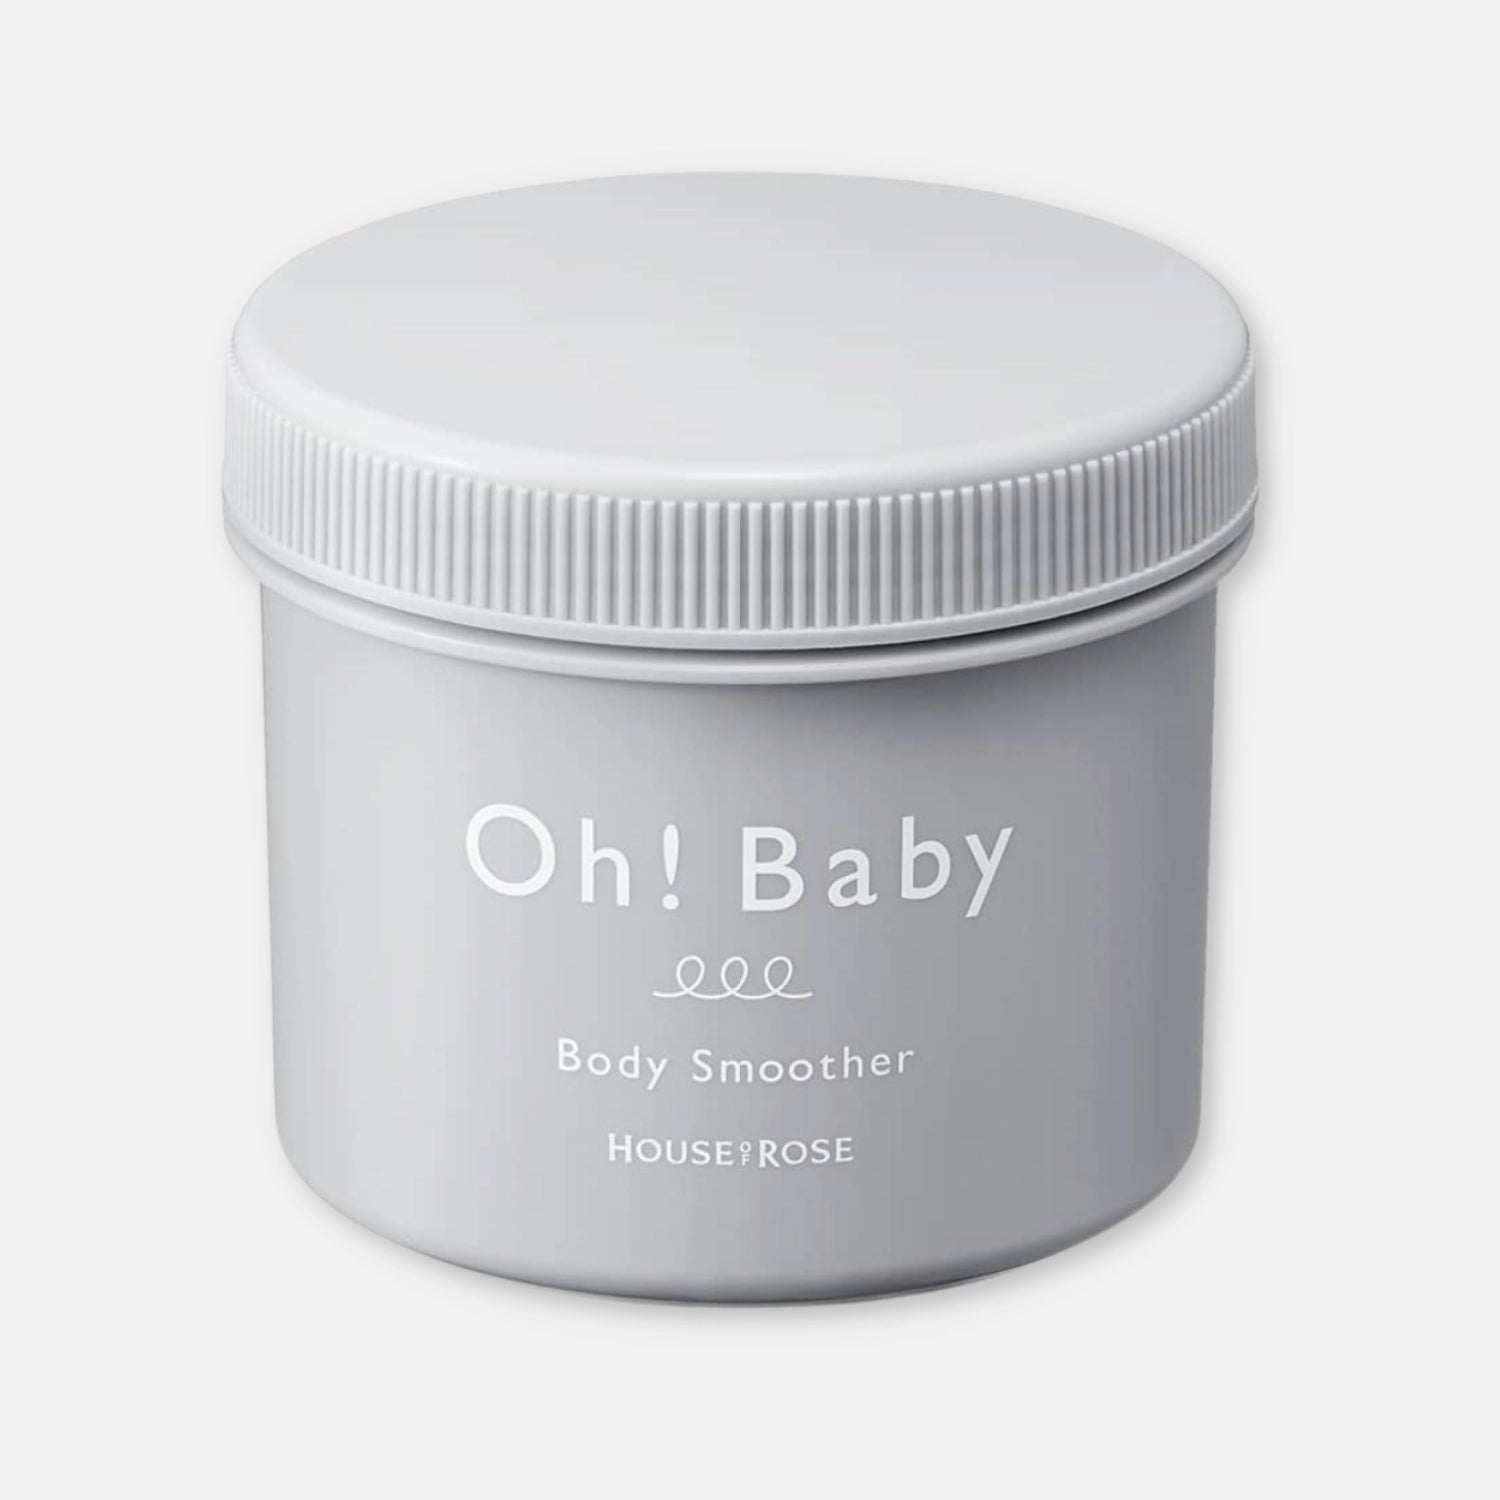 House Of Rose Oh! Baby Body Scrub Smoother Cream Charcoal 350g - Buy Me Japan